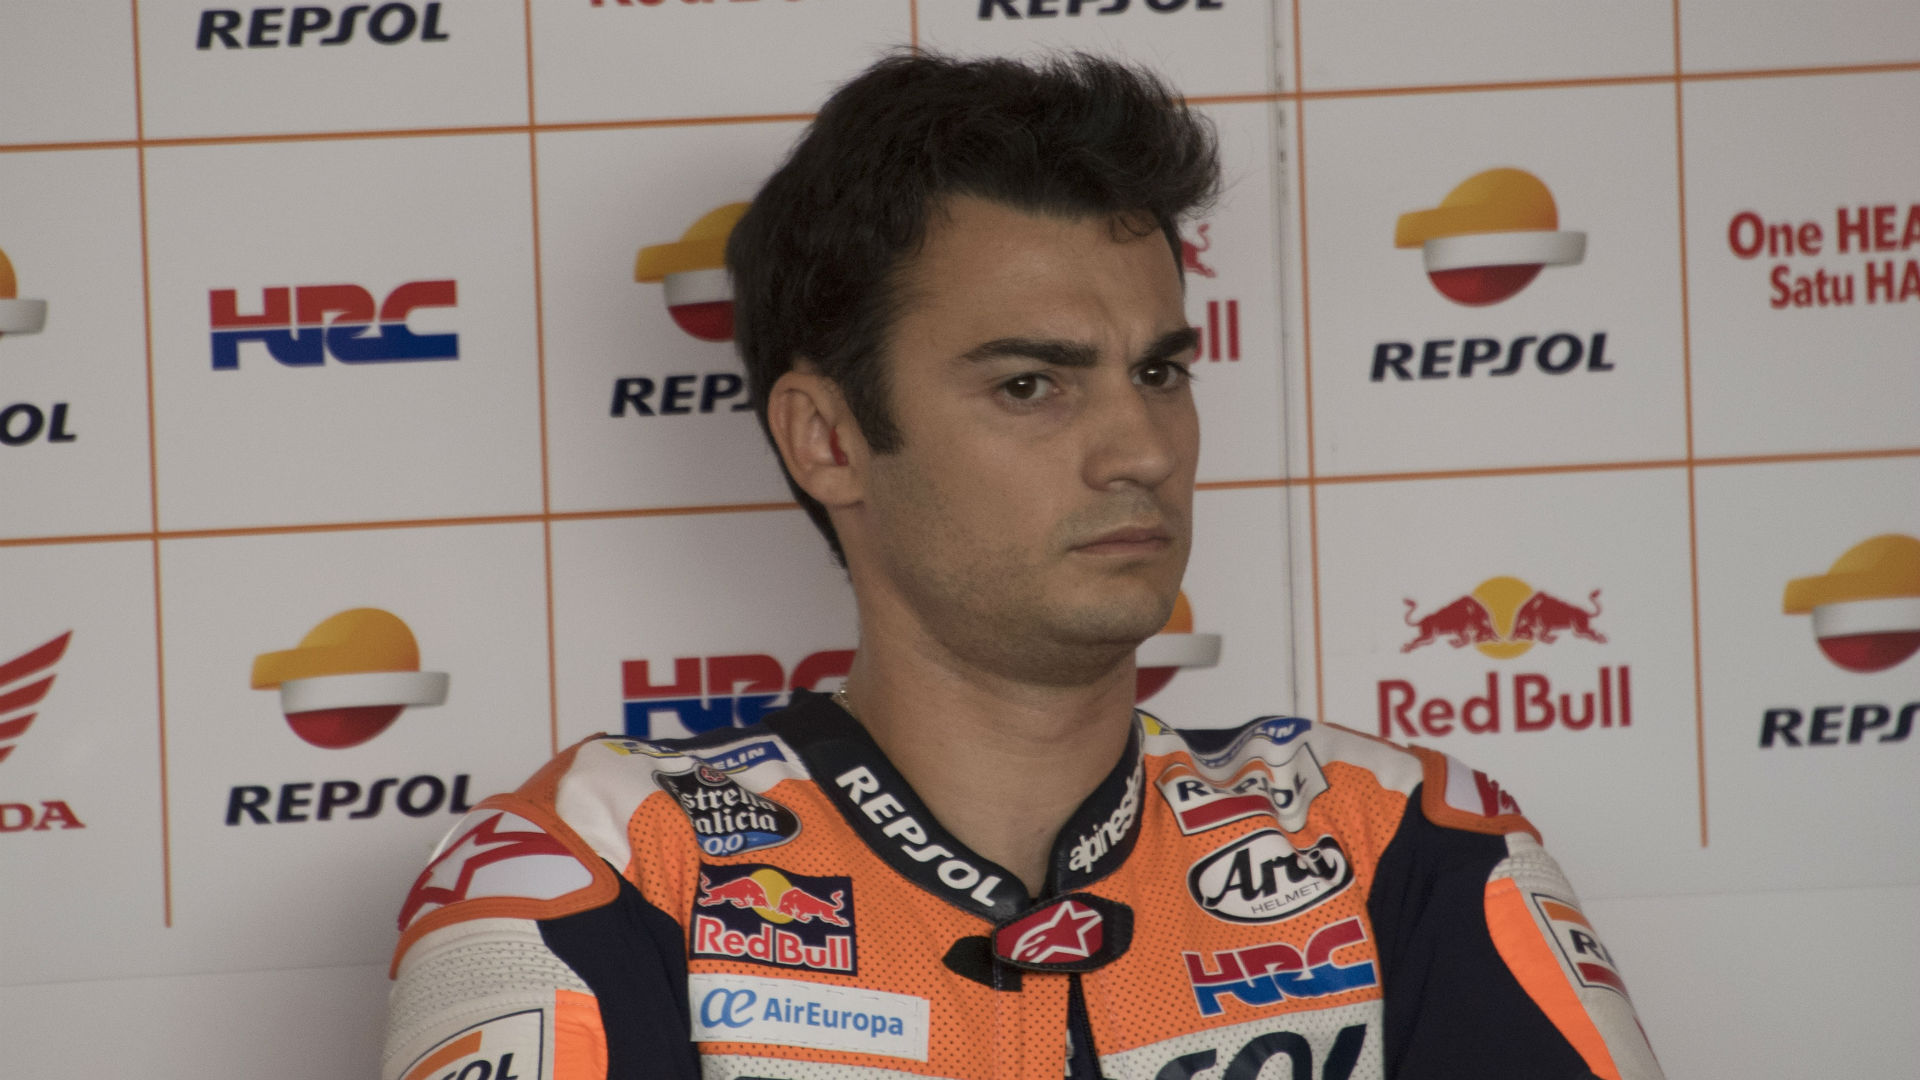 Dani Pedrosa suffered a broken wrist in Argentina and is unlikely to be fit for MotoGP's Grand Prix of the Americas.